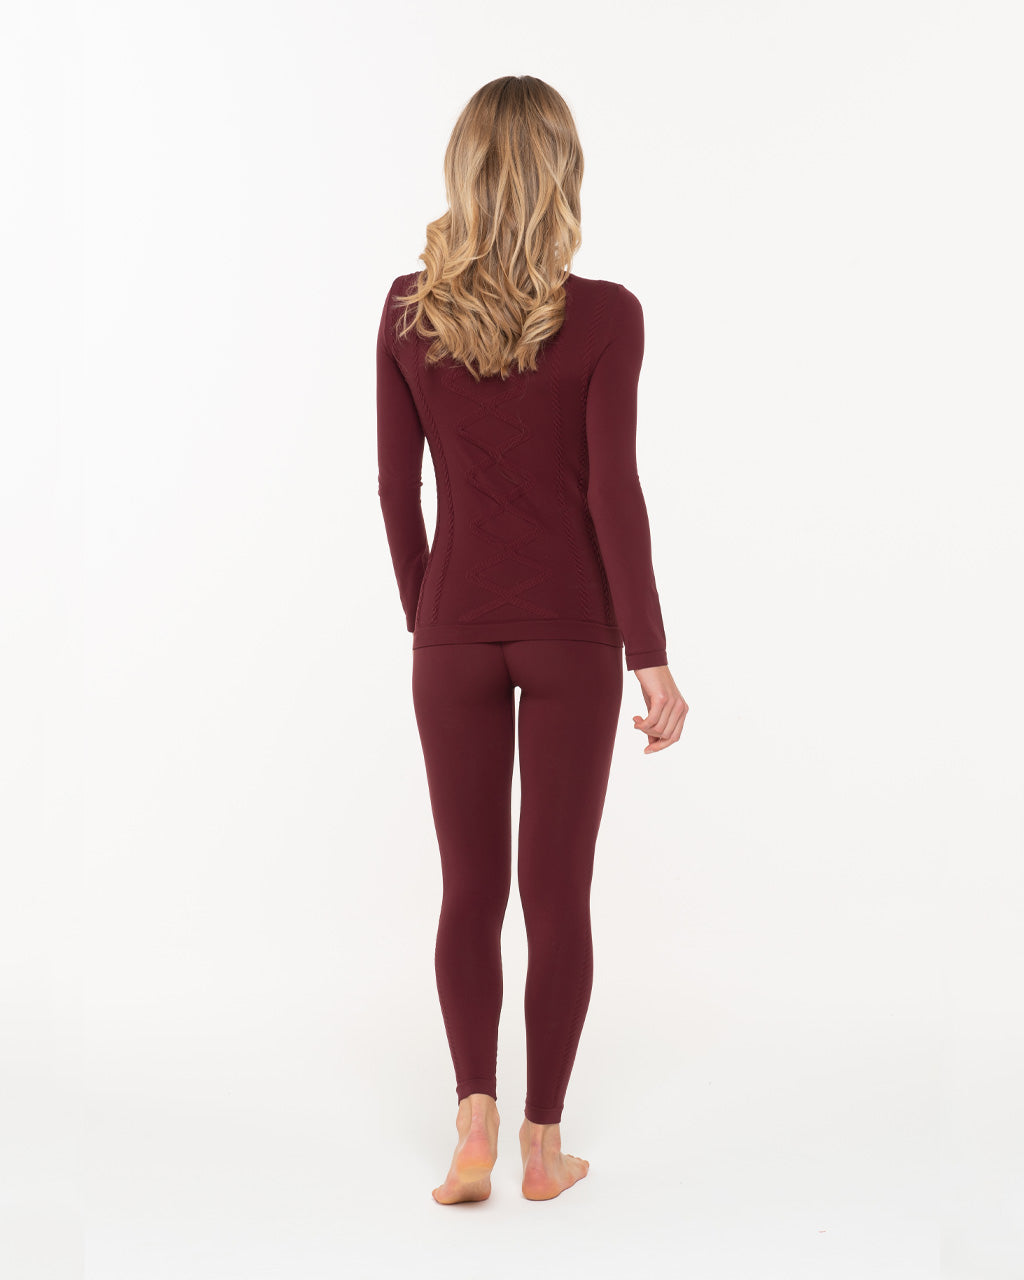 Thermal set - ESSENTIAL - Red mulberry